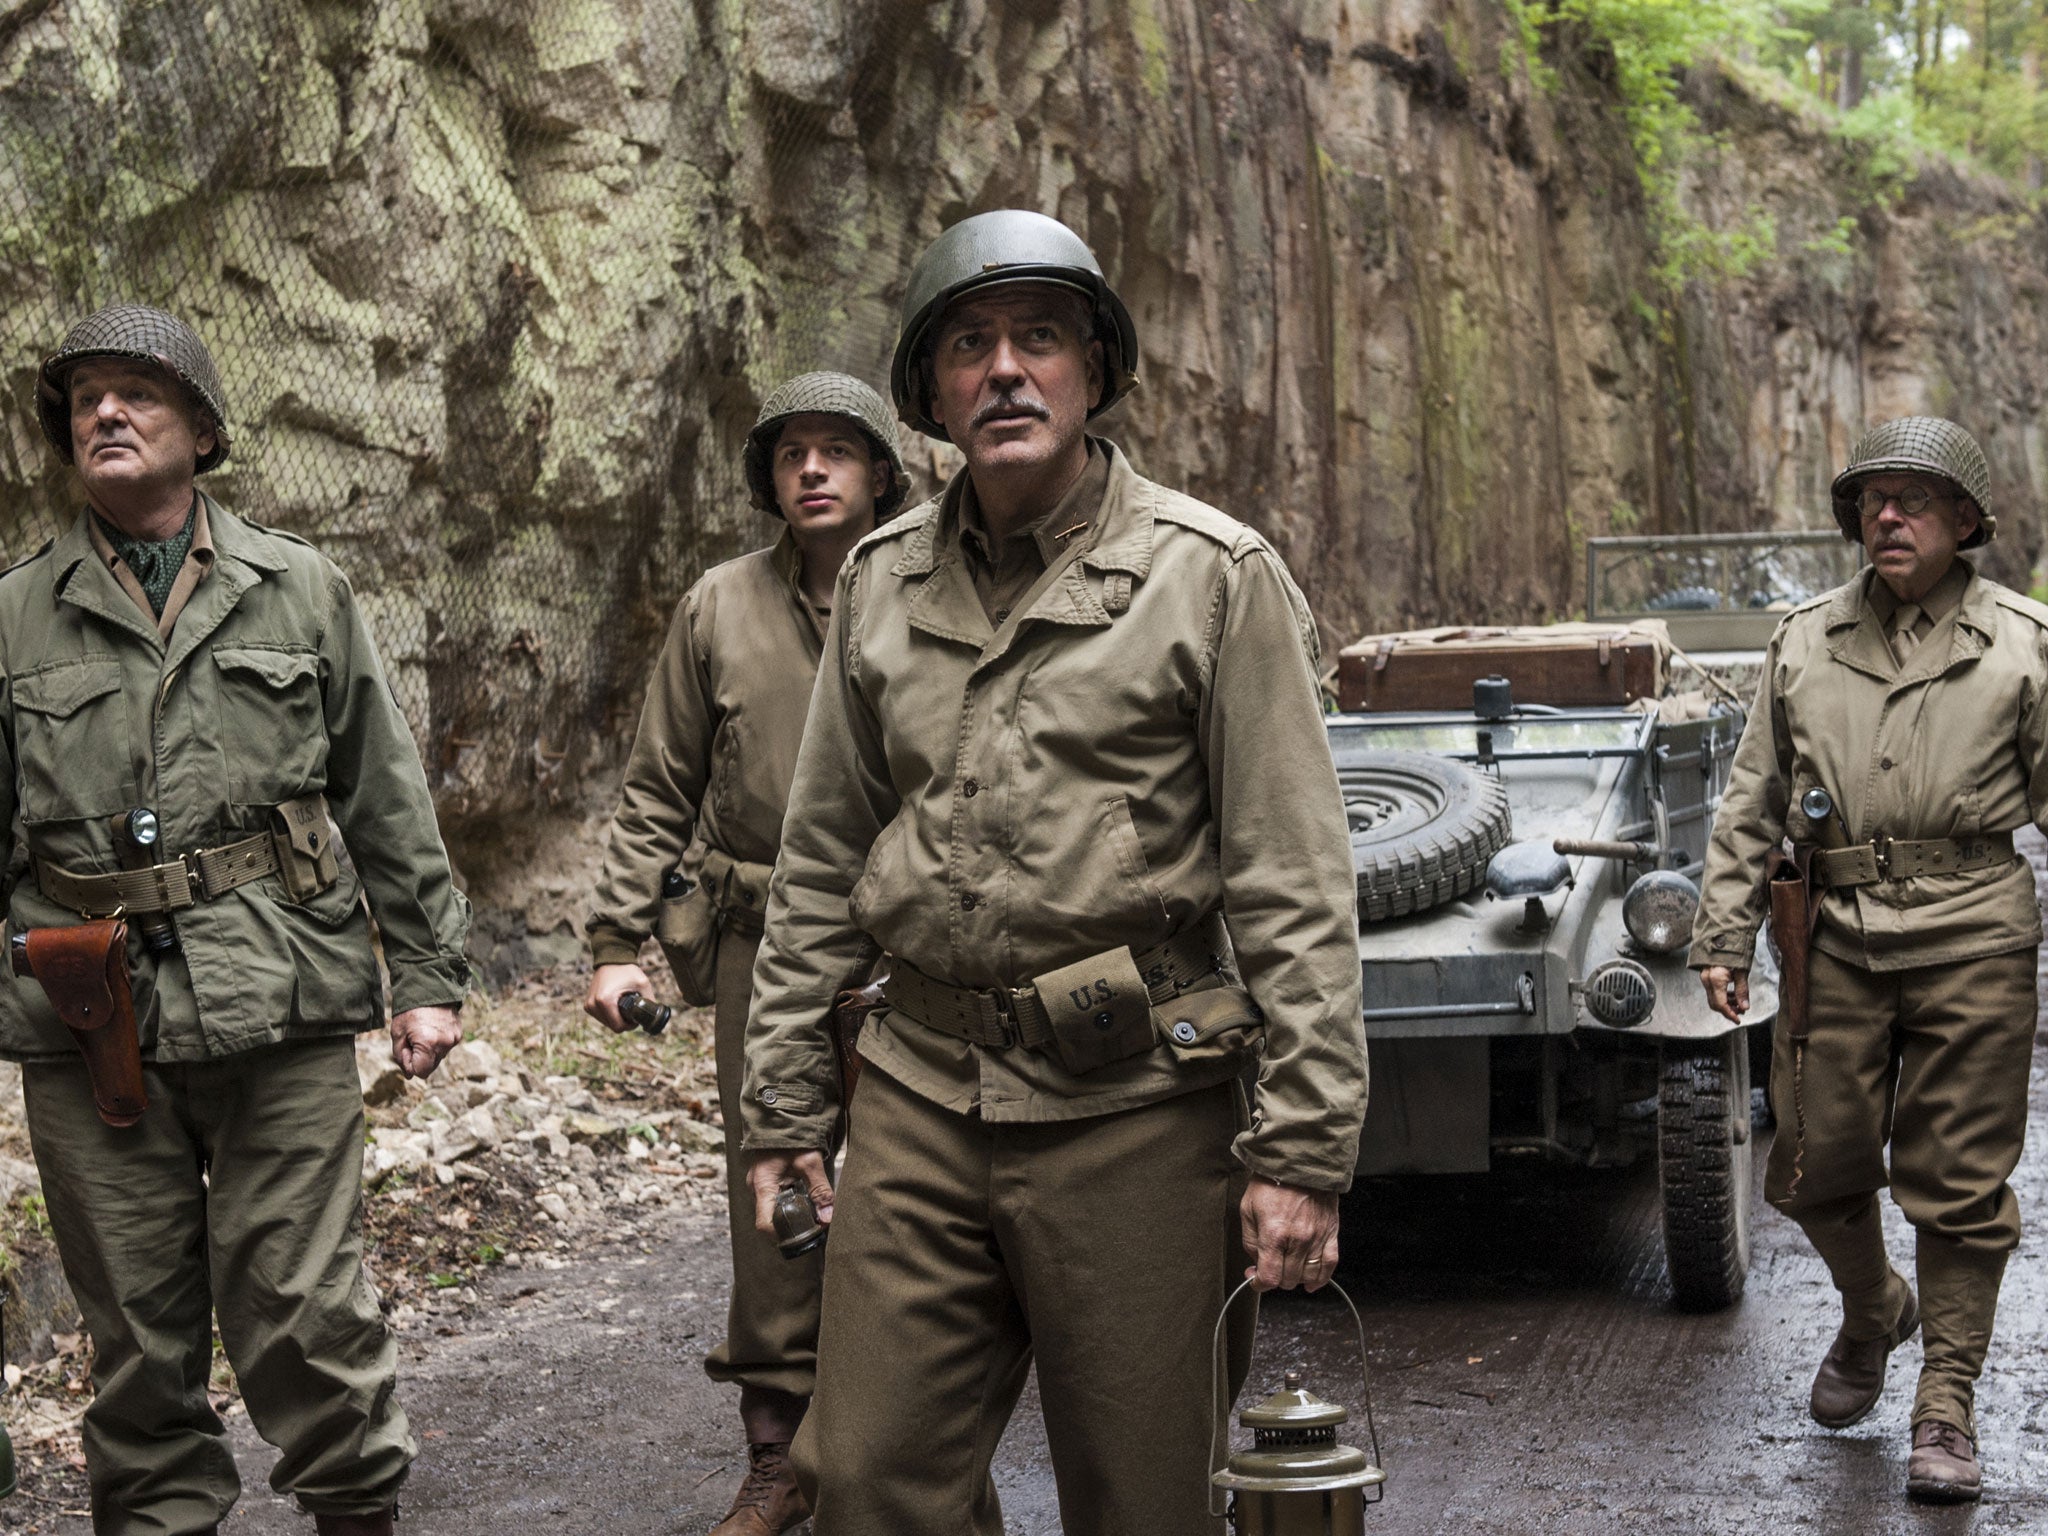 George Clooney plays LT Frank Stokes in The Monuments Men